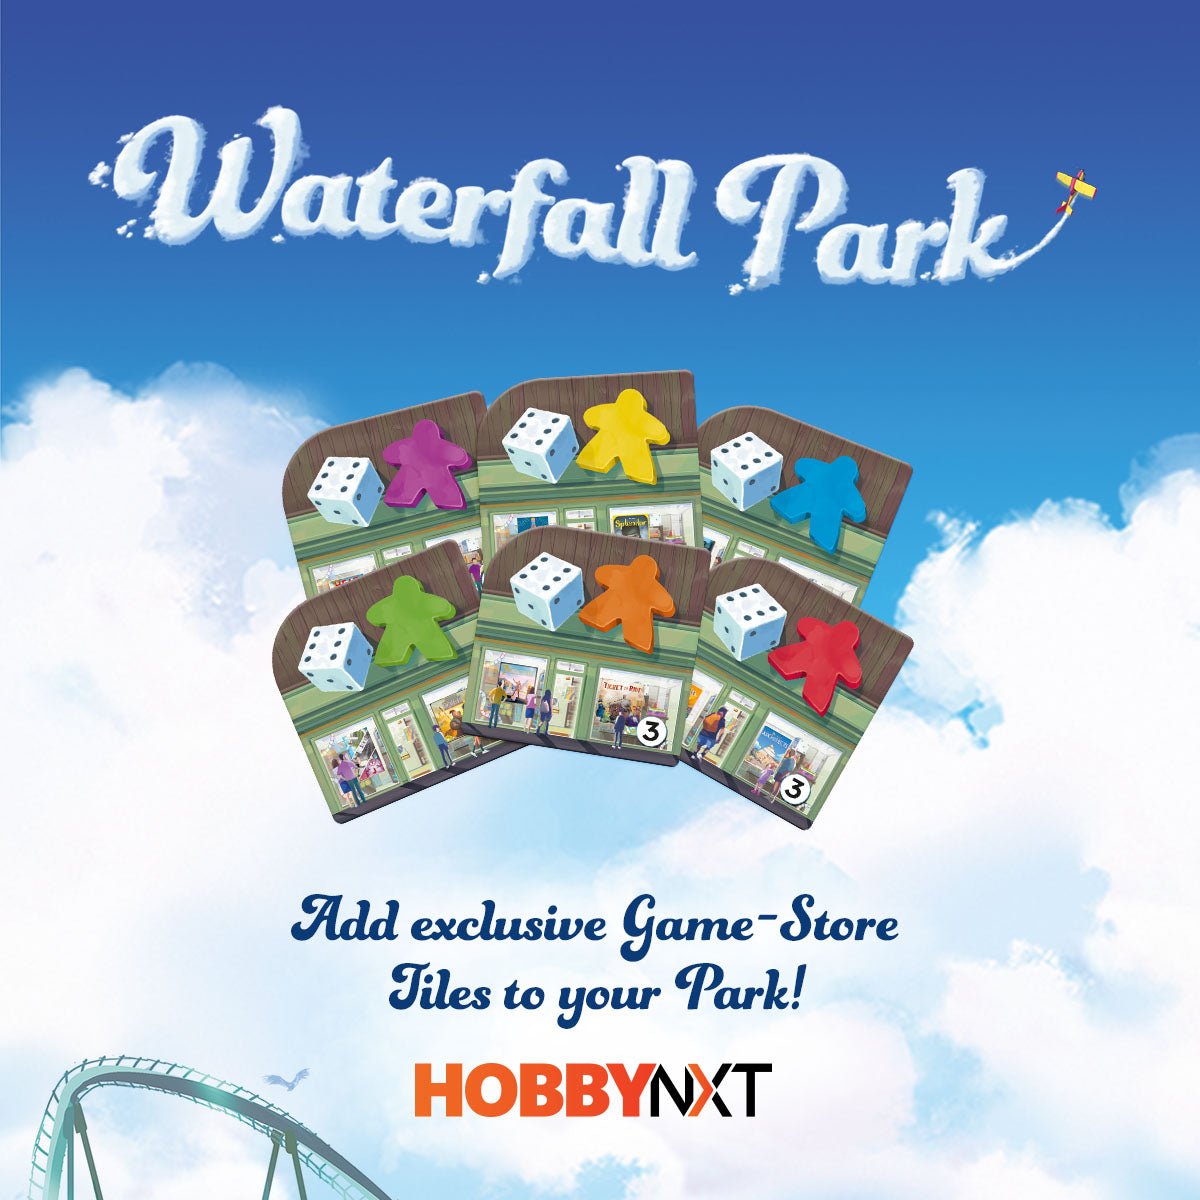 Waterfall Park from Repos Production at The Compleat Strategist